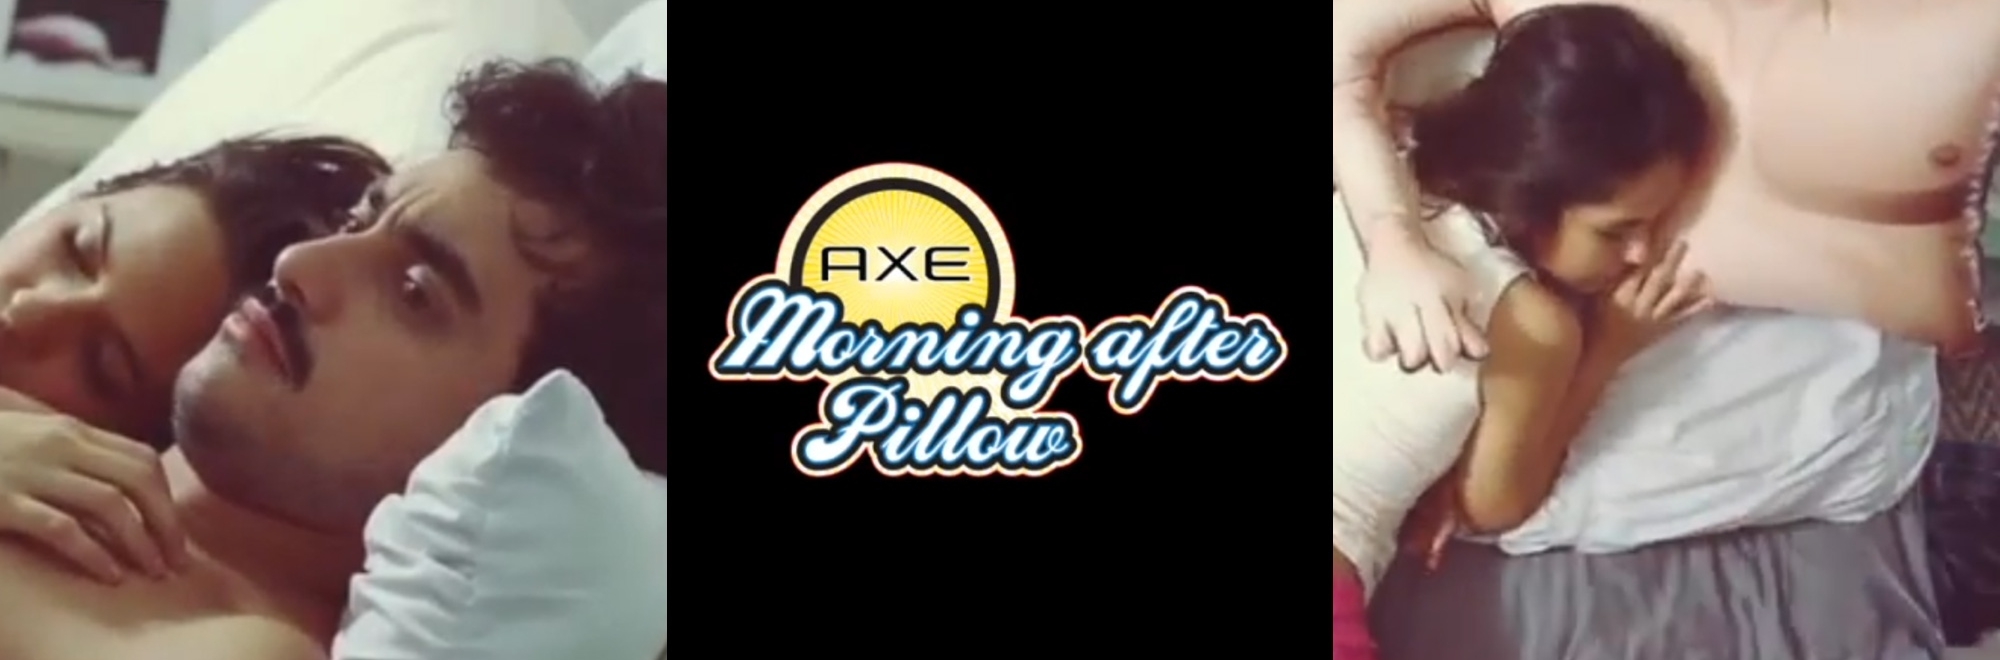 Why ‘The Morning After Pillow’ created by Axe (Lynx in the UK) in 2012 would be given the cold shoulder today